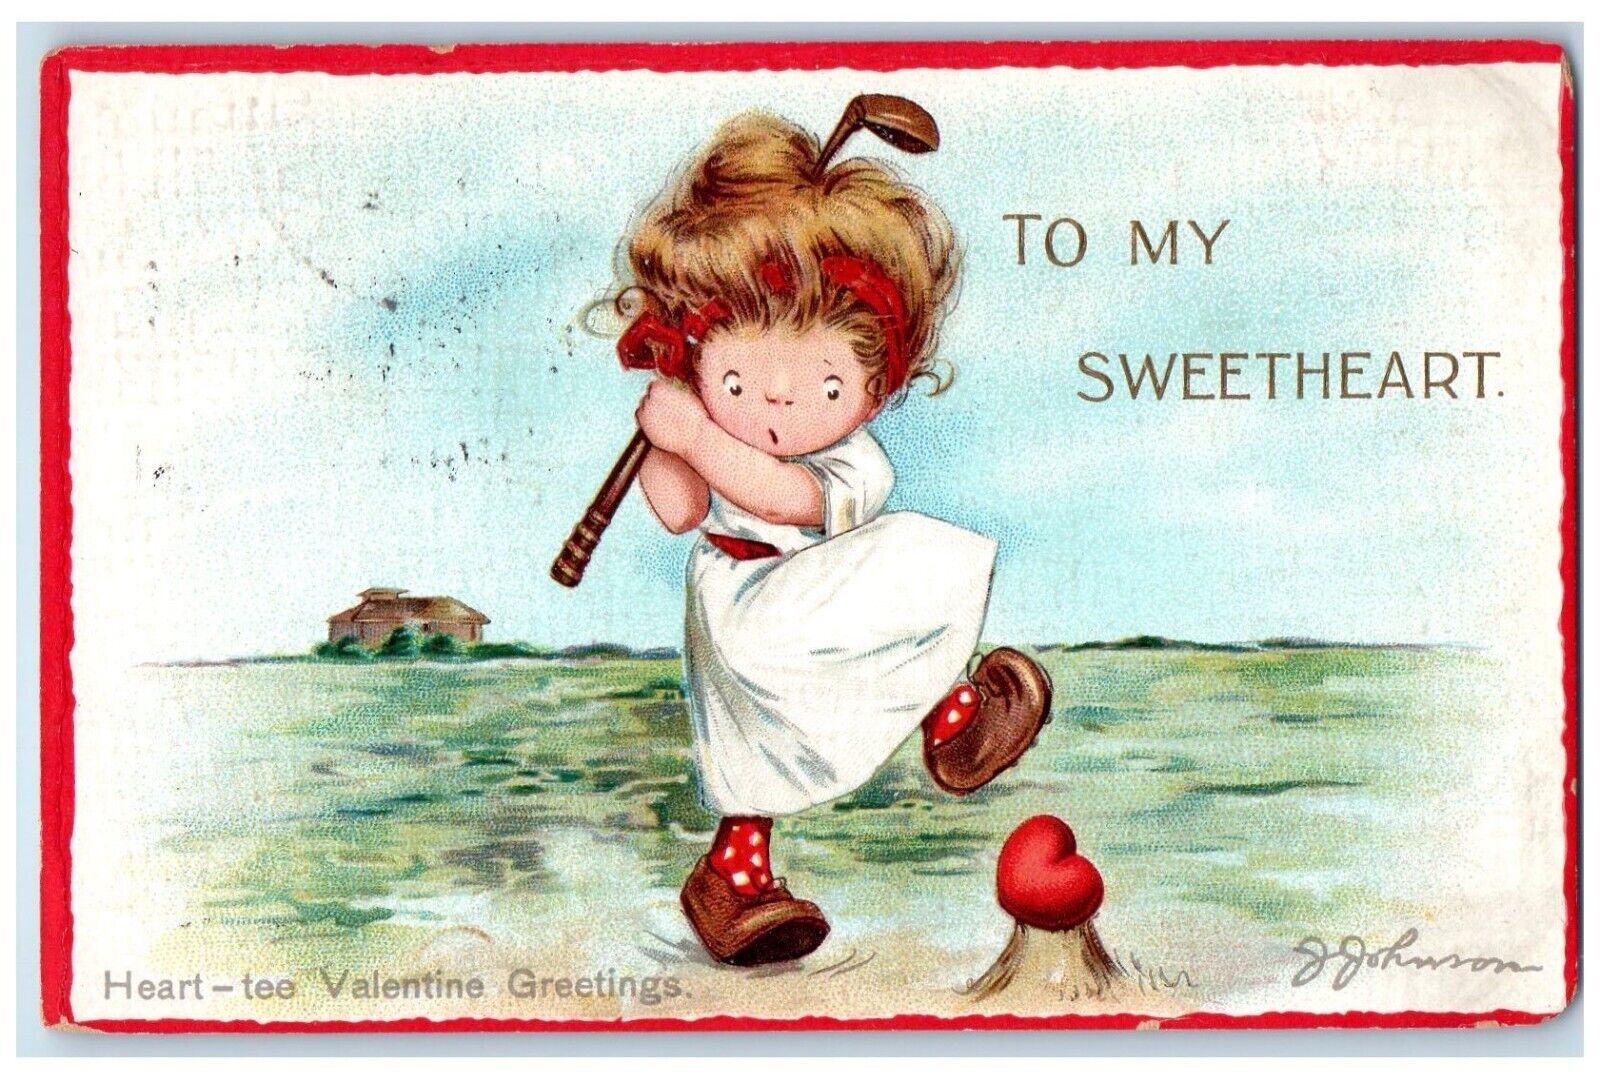 1912 Valentine Greetings Girl Golfing Heart House RPO Posted Antique Postcard